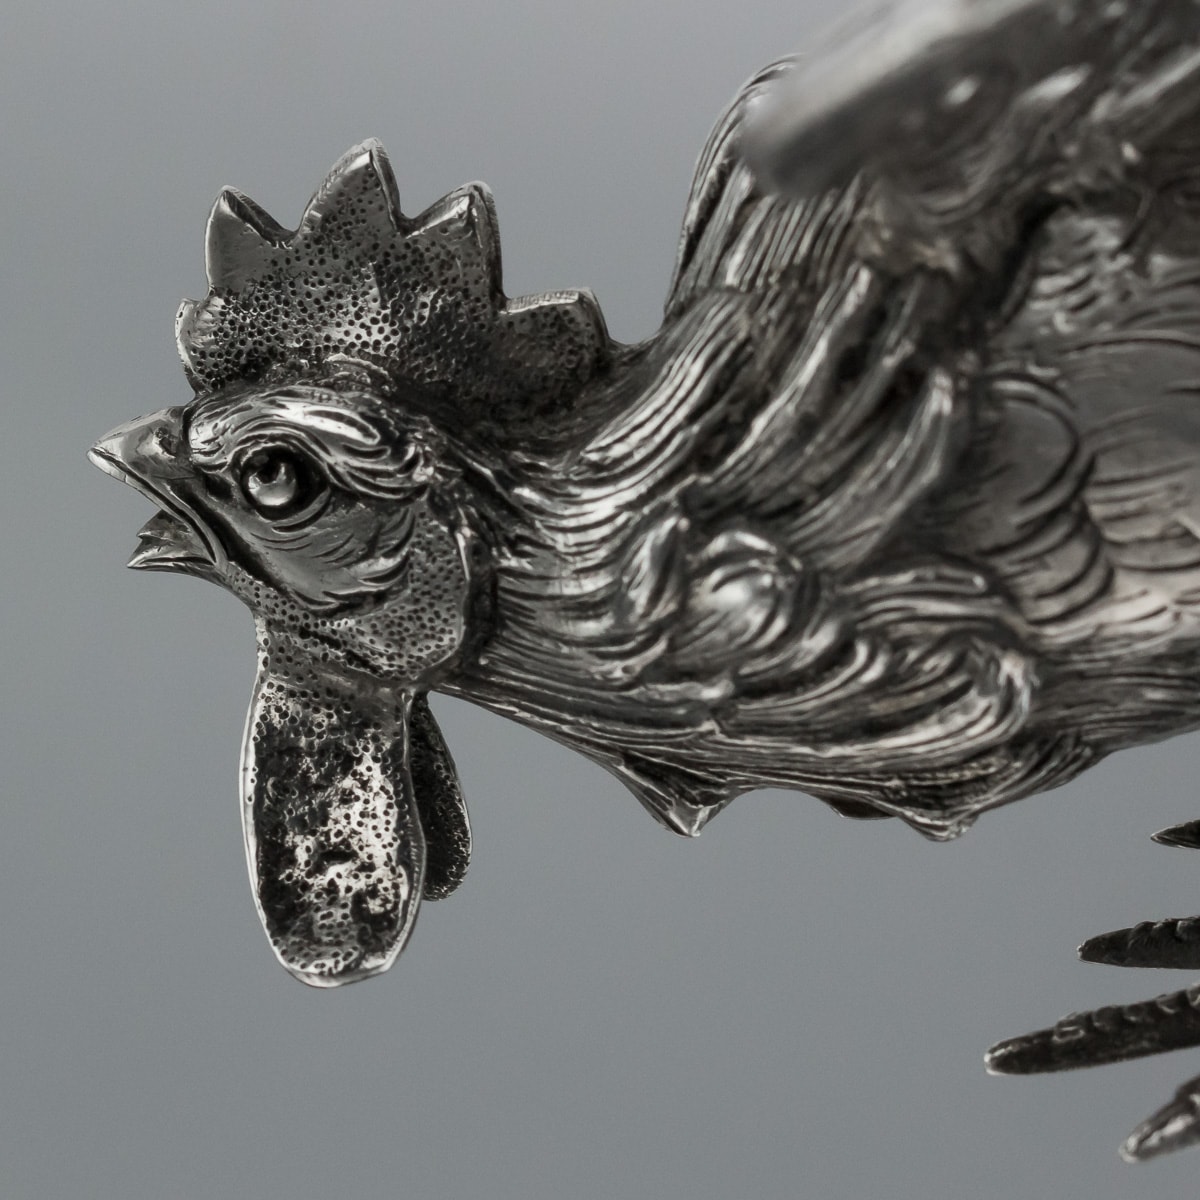 A PAIR OF GERMAN SILVER TABLE ORNAMENTS MODELLED AS FIGHTING COCKERELS - Image 41 of 41